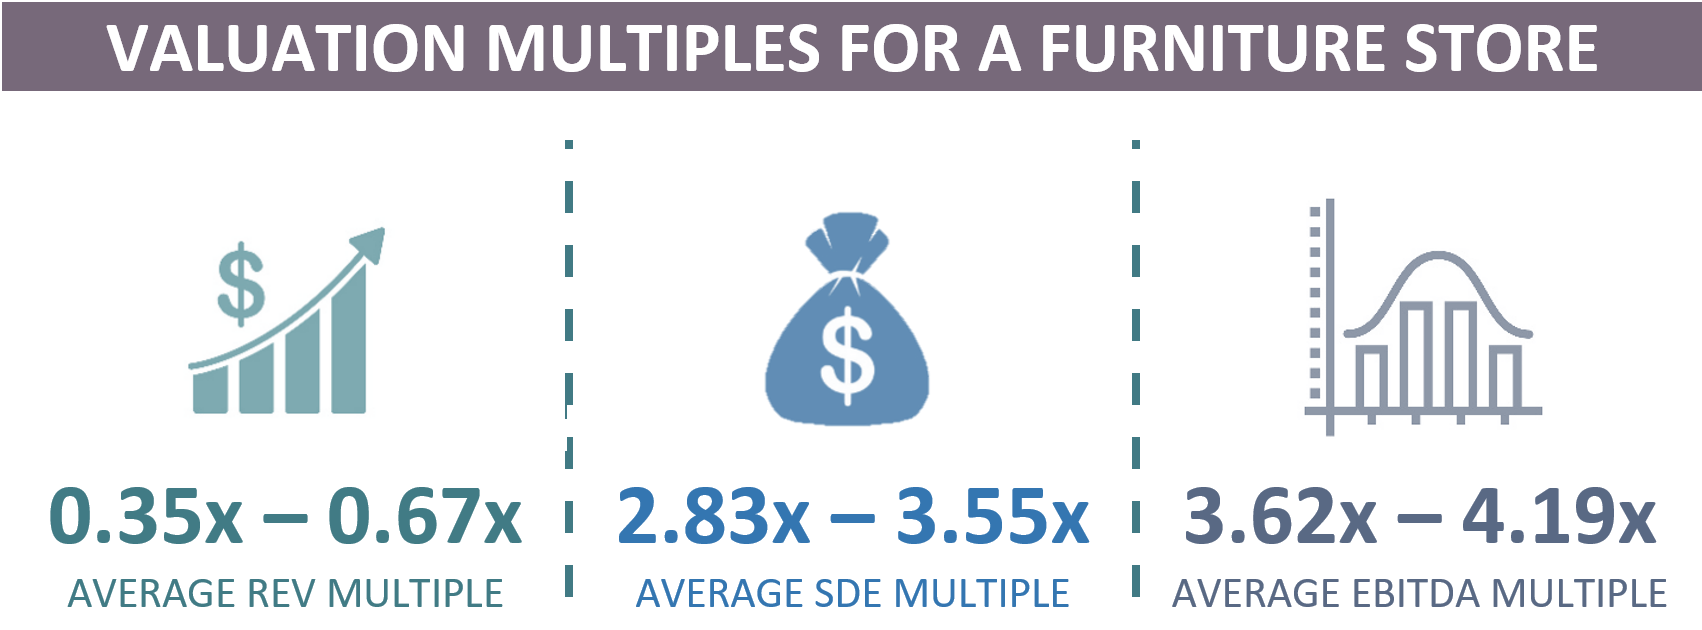 Valuation Multiples For A Furniture Store